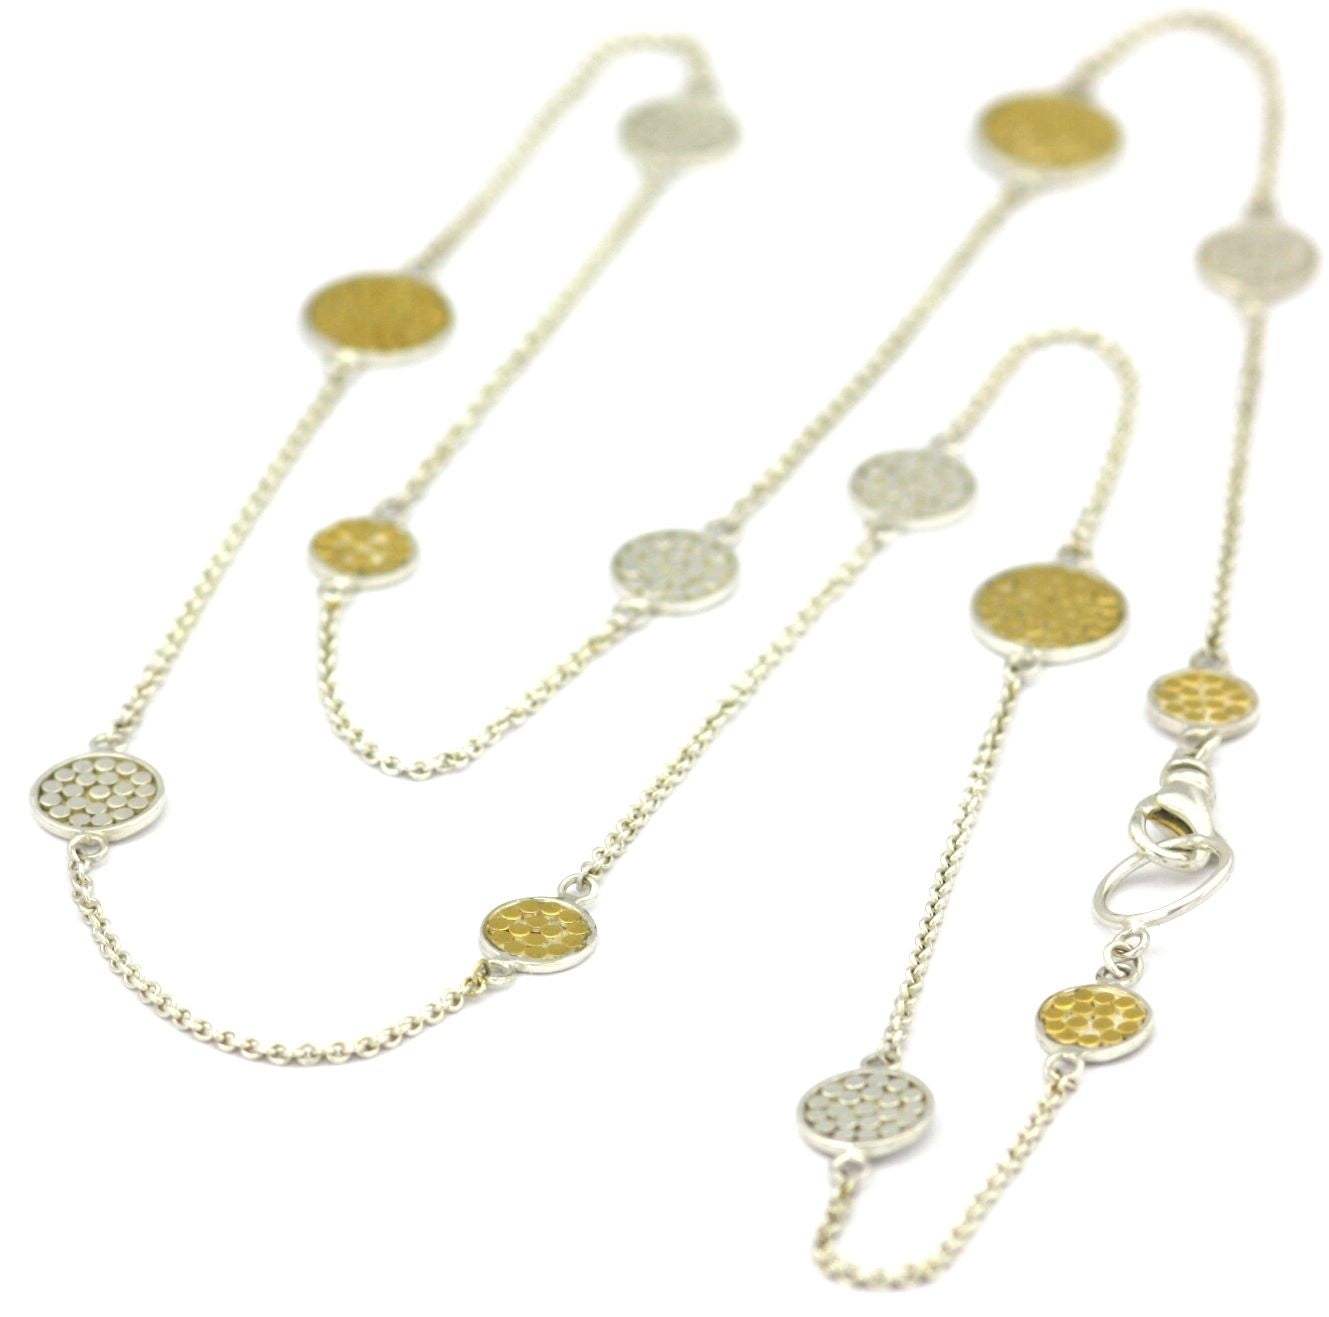 N841G SOHO .925 Sterling Silver Round Multi-Station Necklace With 18k Gold Vermeil - Adjustable 18-20"